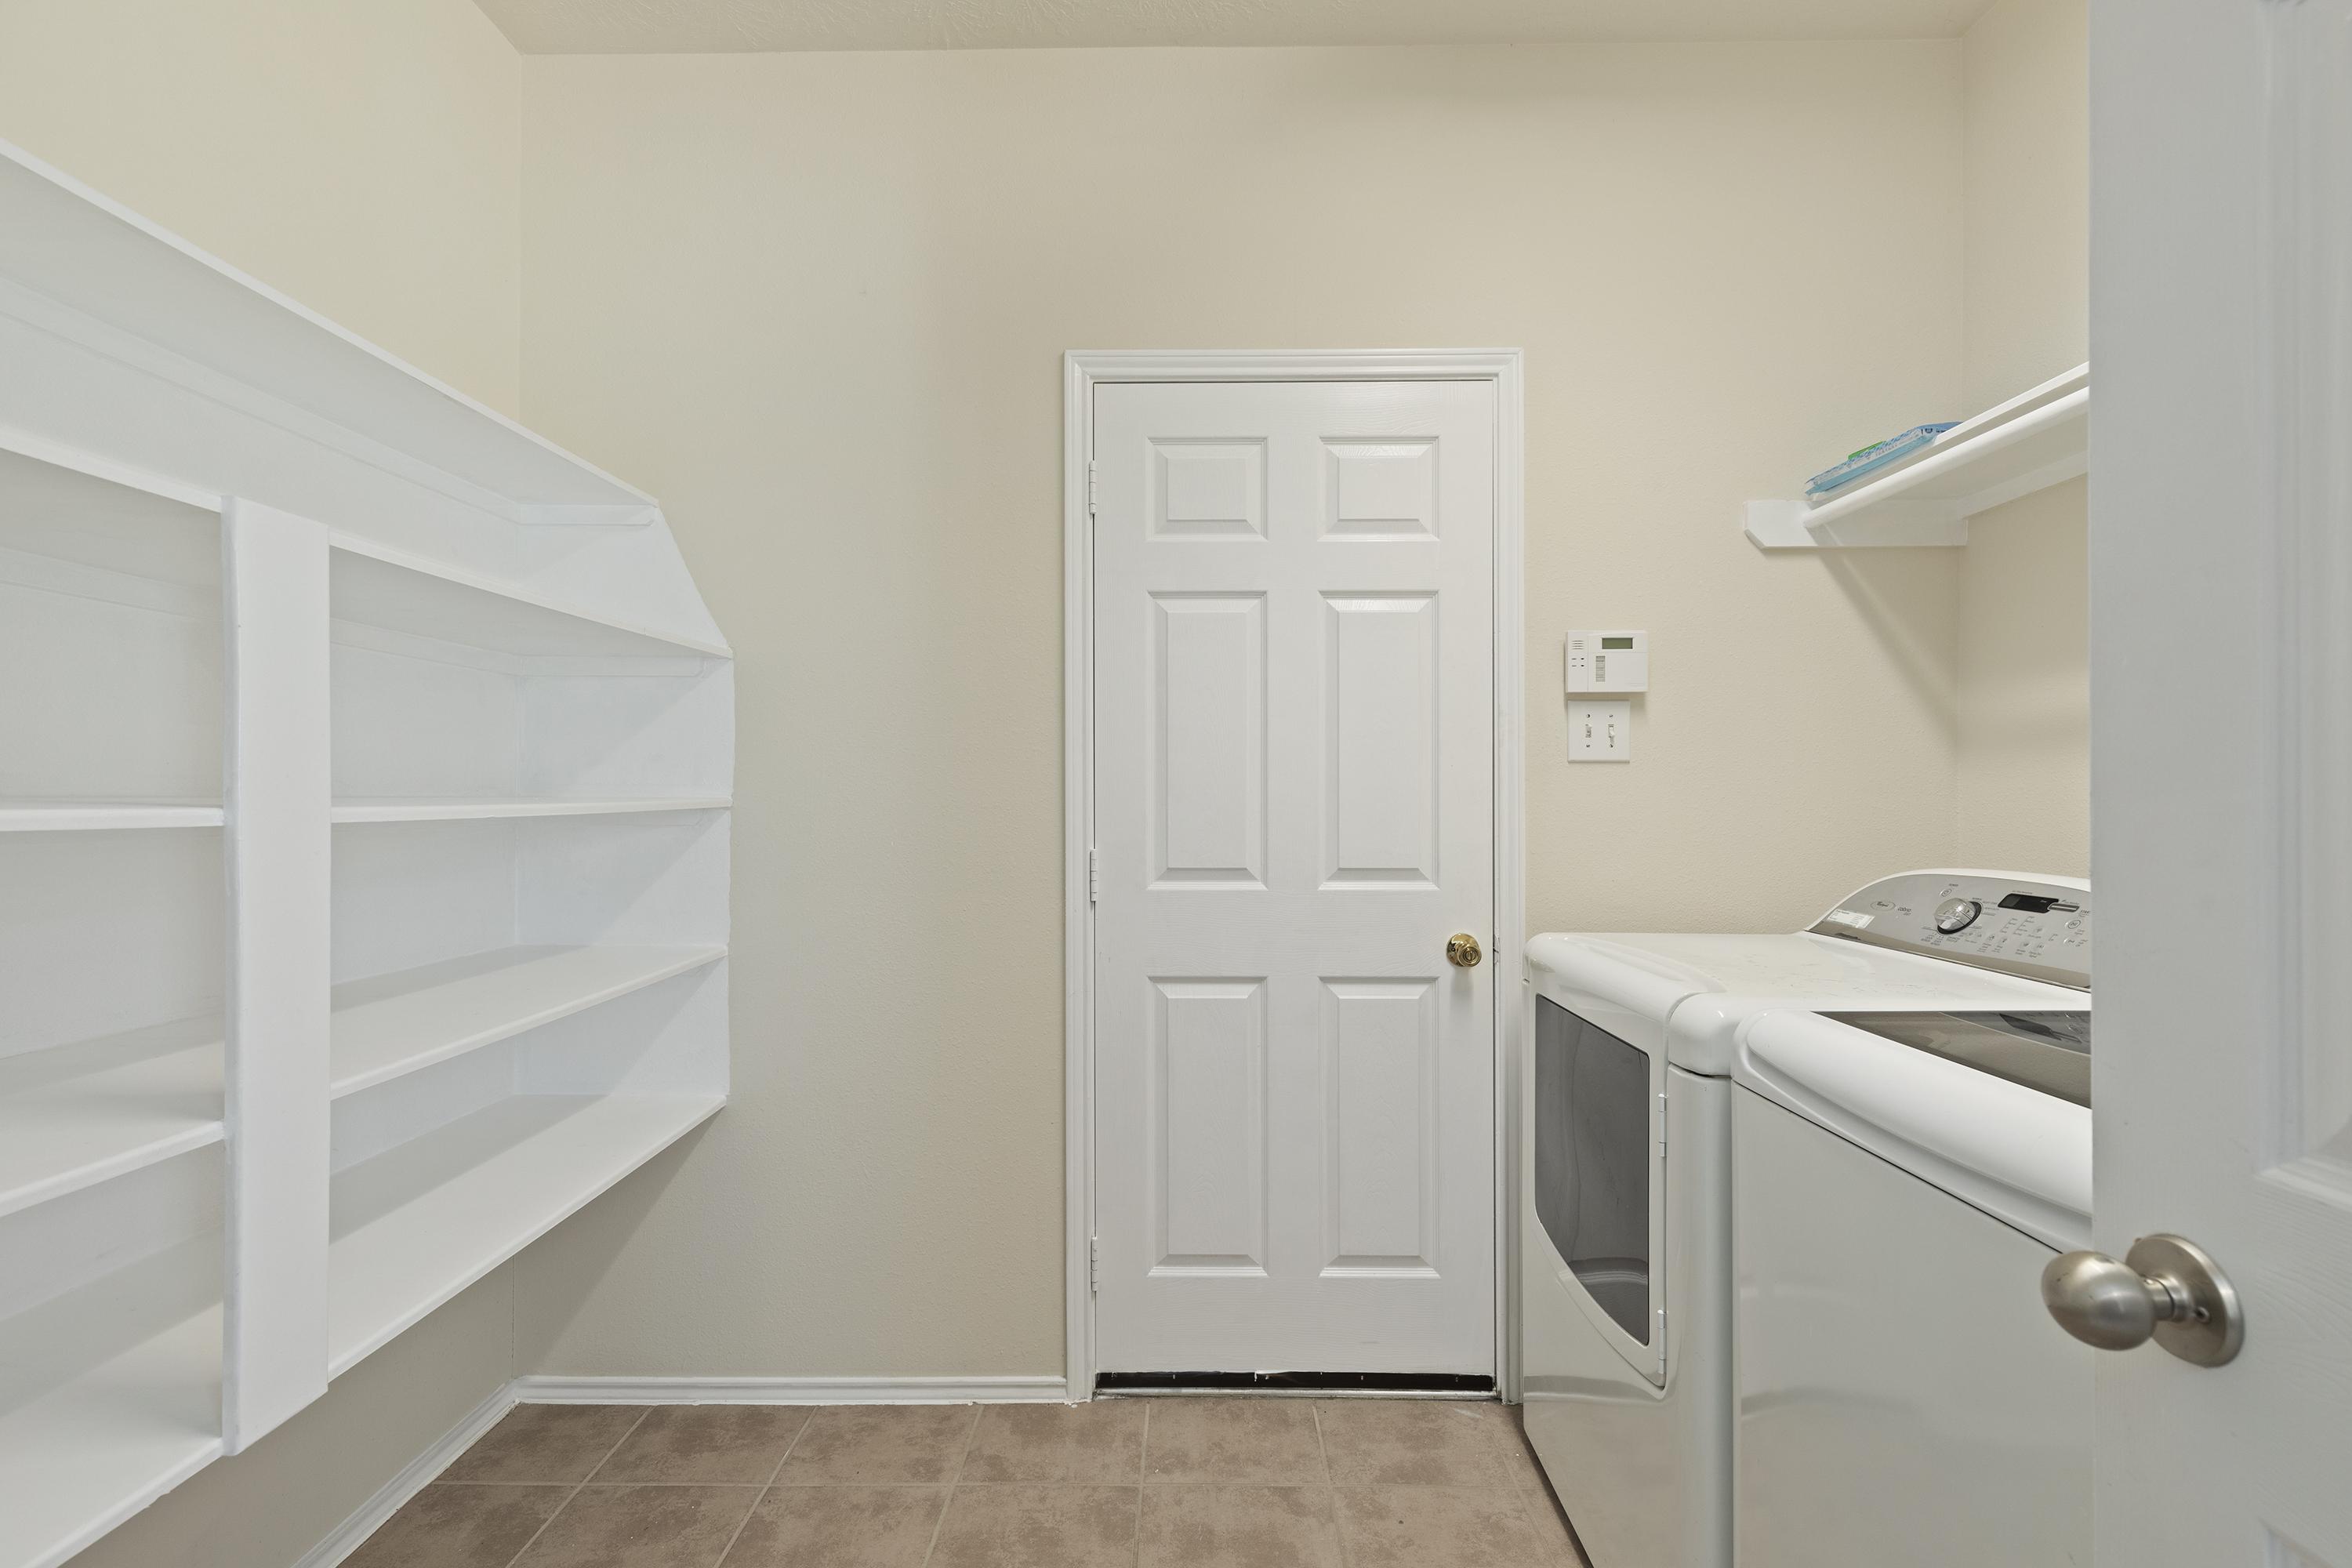 This pantry is a dream! Spacious for housing goodies and treats and includes luxury washer and dryer!